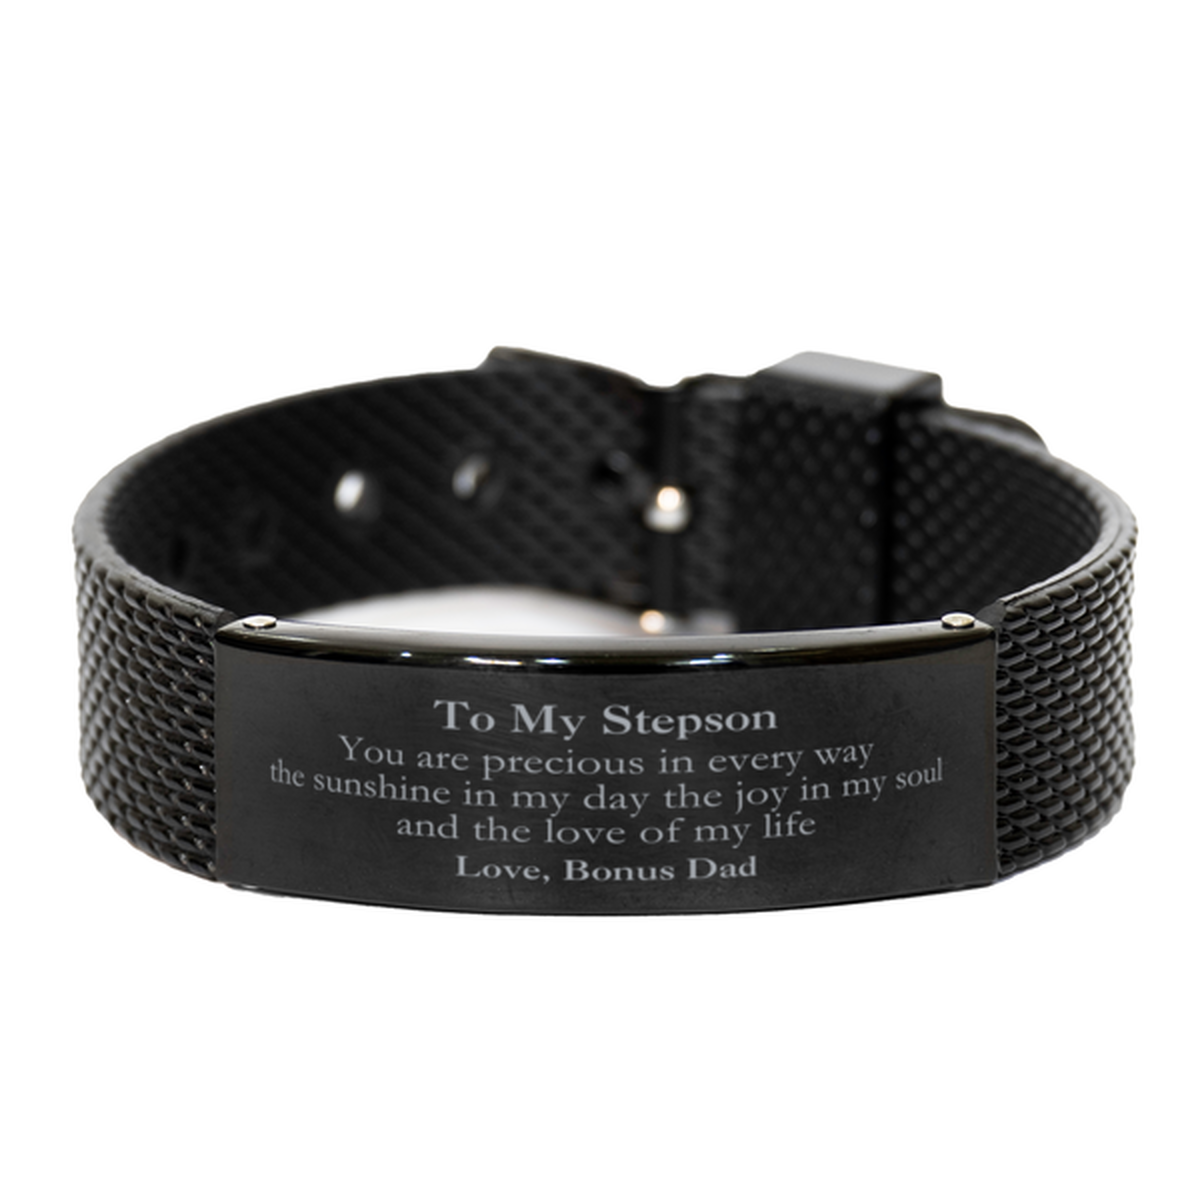 Graduation Gifts for Stepson Black Shark Mesh Bracelet Present from Bonus Dad, Christmas Stepson Birthday Gifts Stepson You are precious in every way the sunshine in my day. Love, Bonus Dad